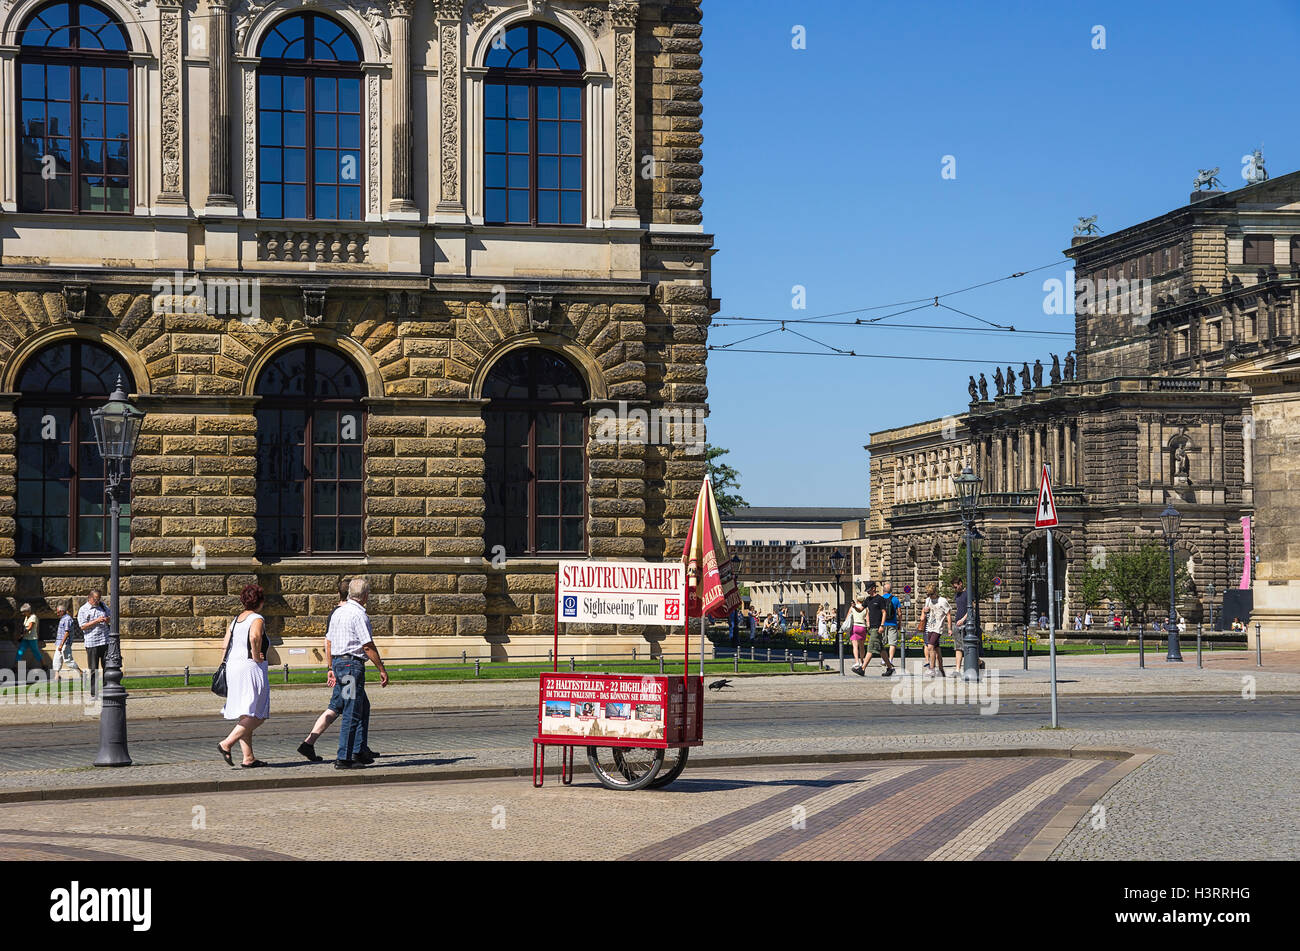 Ticket booth and bus stop for sightseeing tours in the city of Dresden, Saxony, Germany. Stock Photo